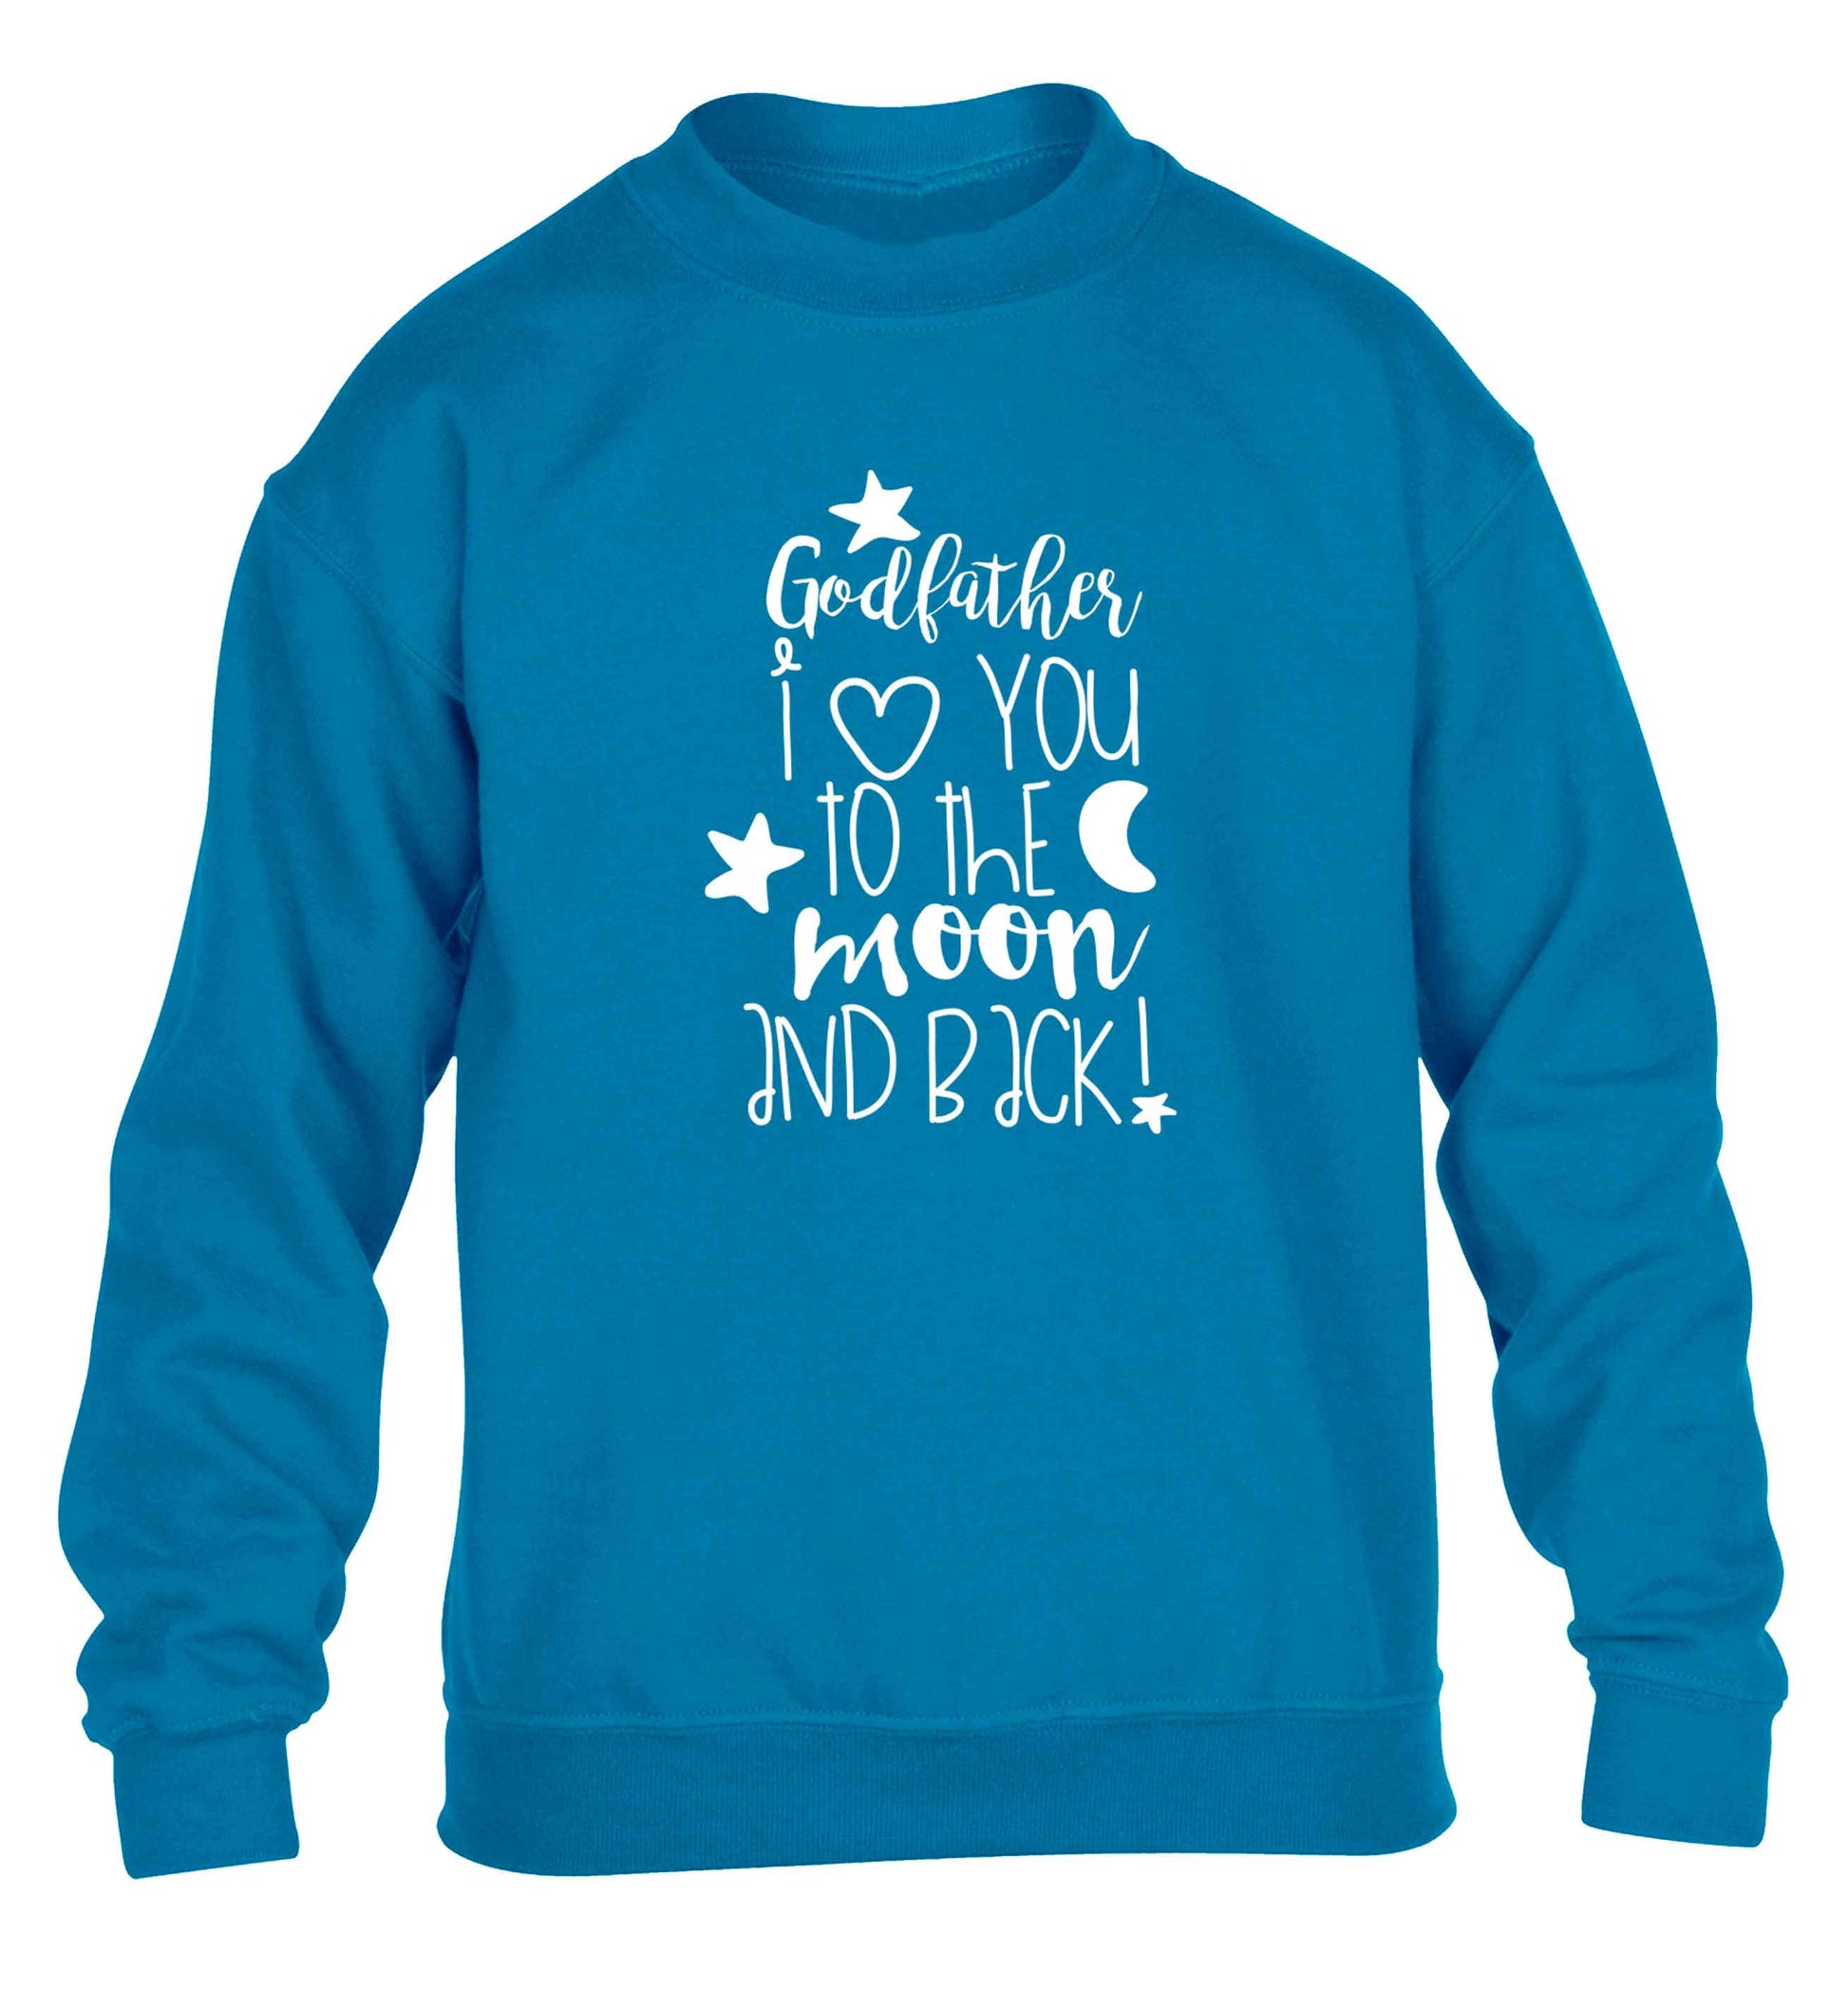 Godfather I love you to the moon and back children's blue sweater 12-13 Years